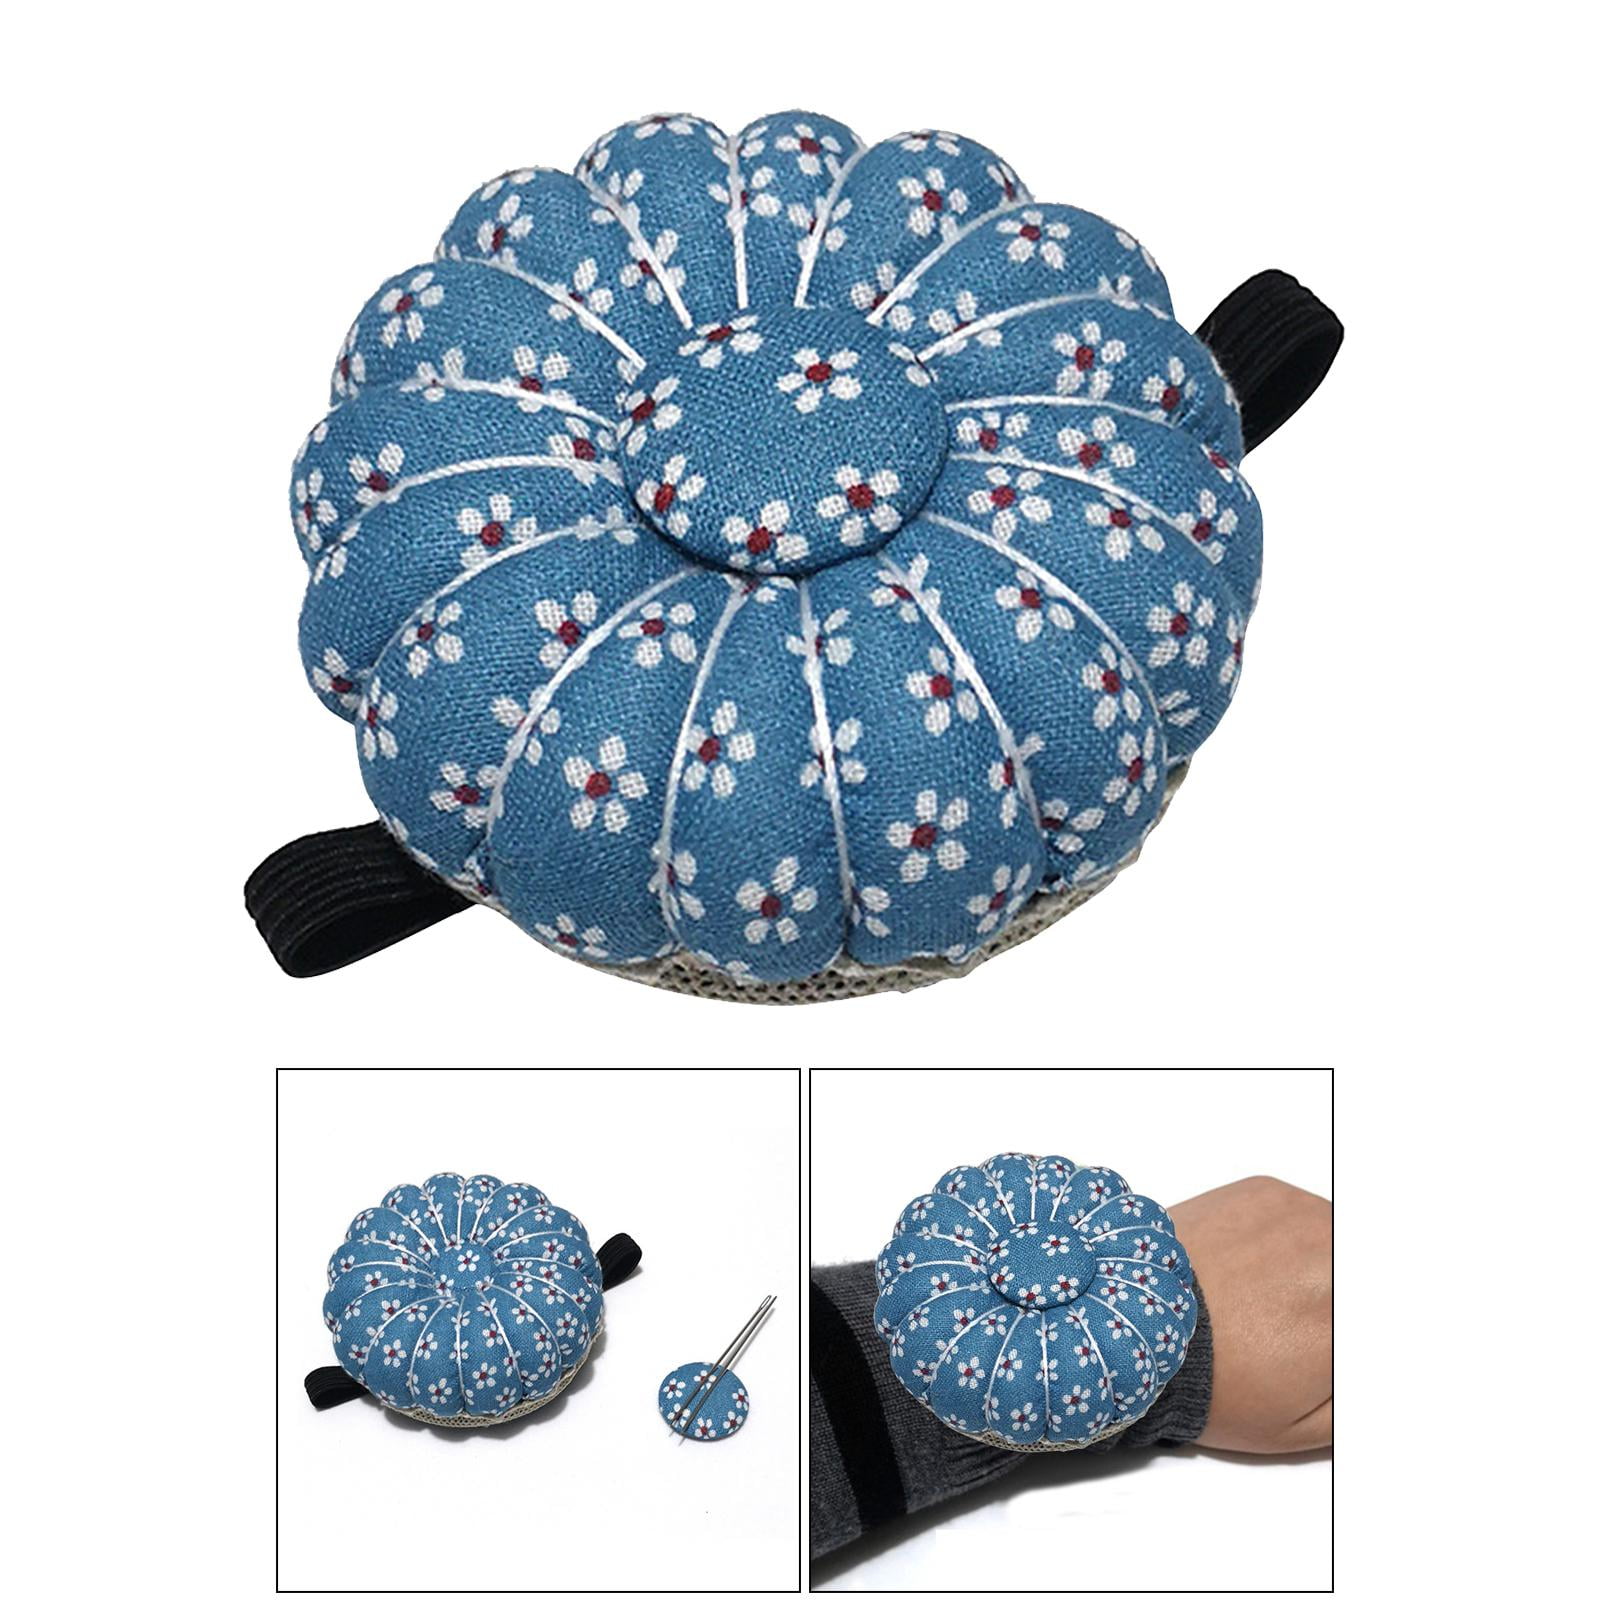 Juvale Magnetic Pin Cushion, Sewing Tools (Blue, 2 Pack) 